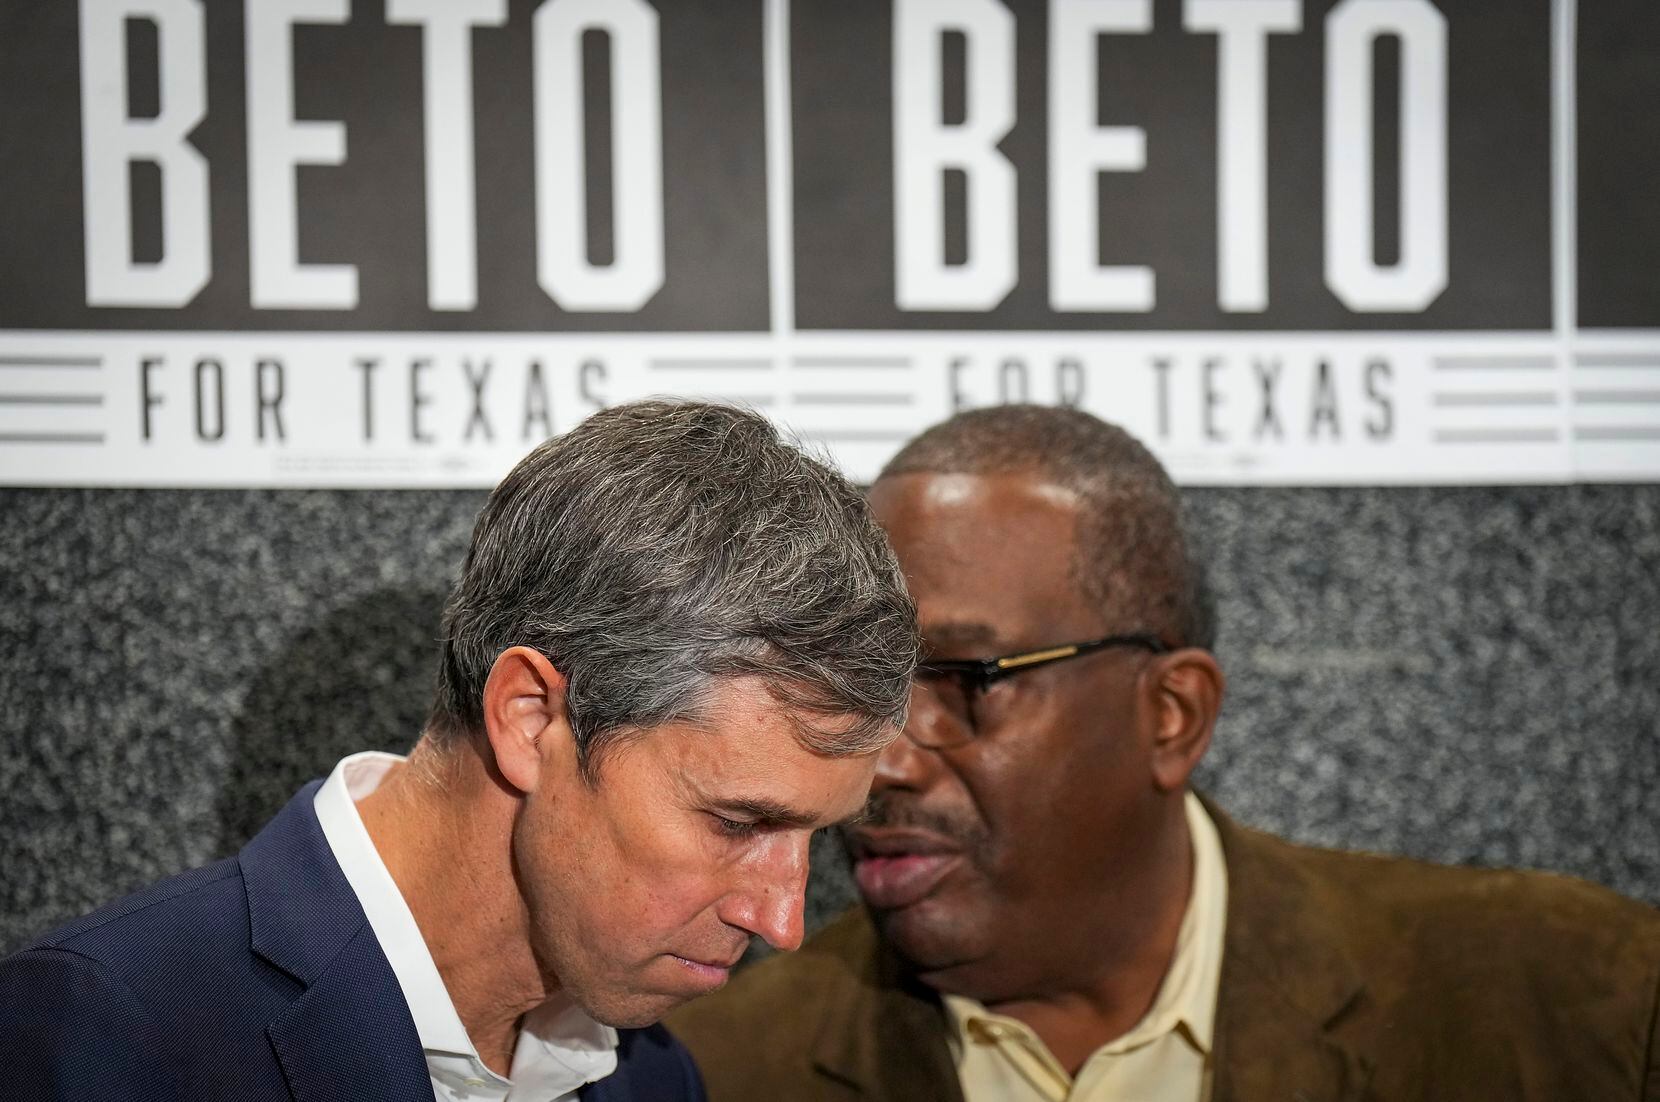 Democratic candidate for governor Beto O'Rourke listens as State Sen. Royce West whispers in...